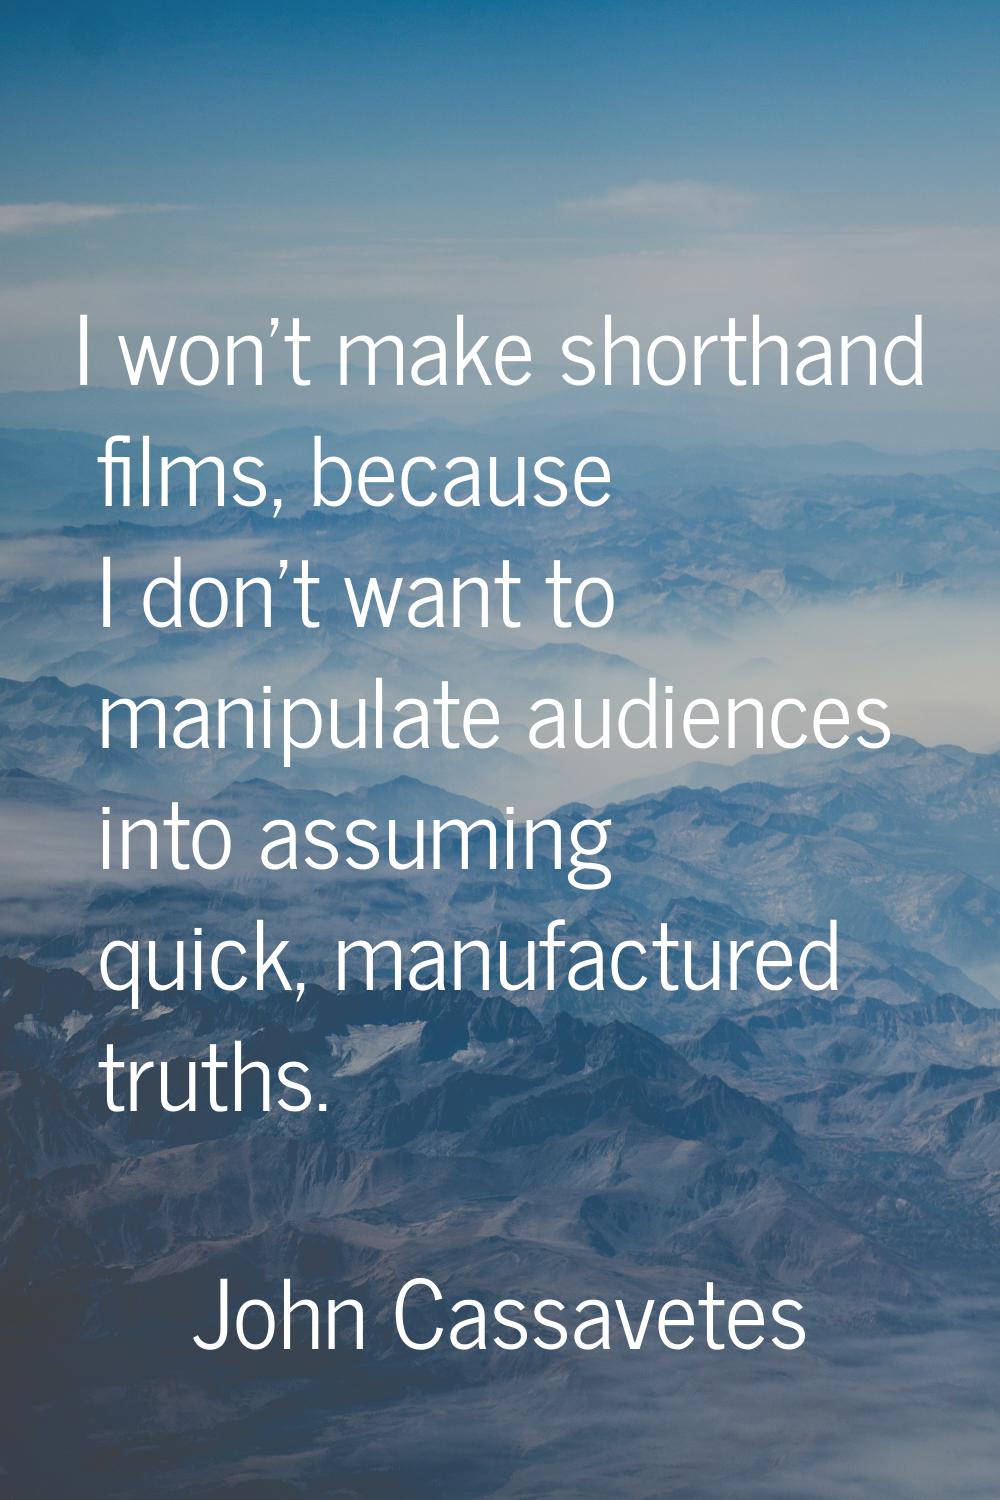 I won't make shorthand films, because I don't want to manipulate audiences into assuming quick, man